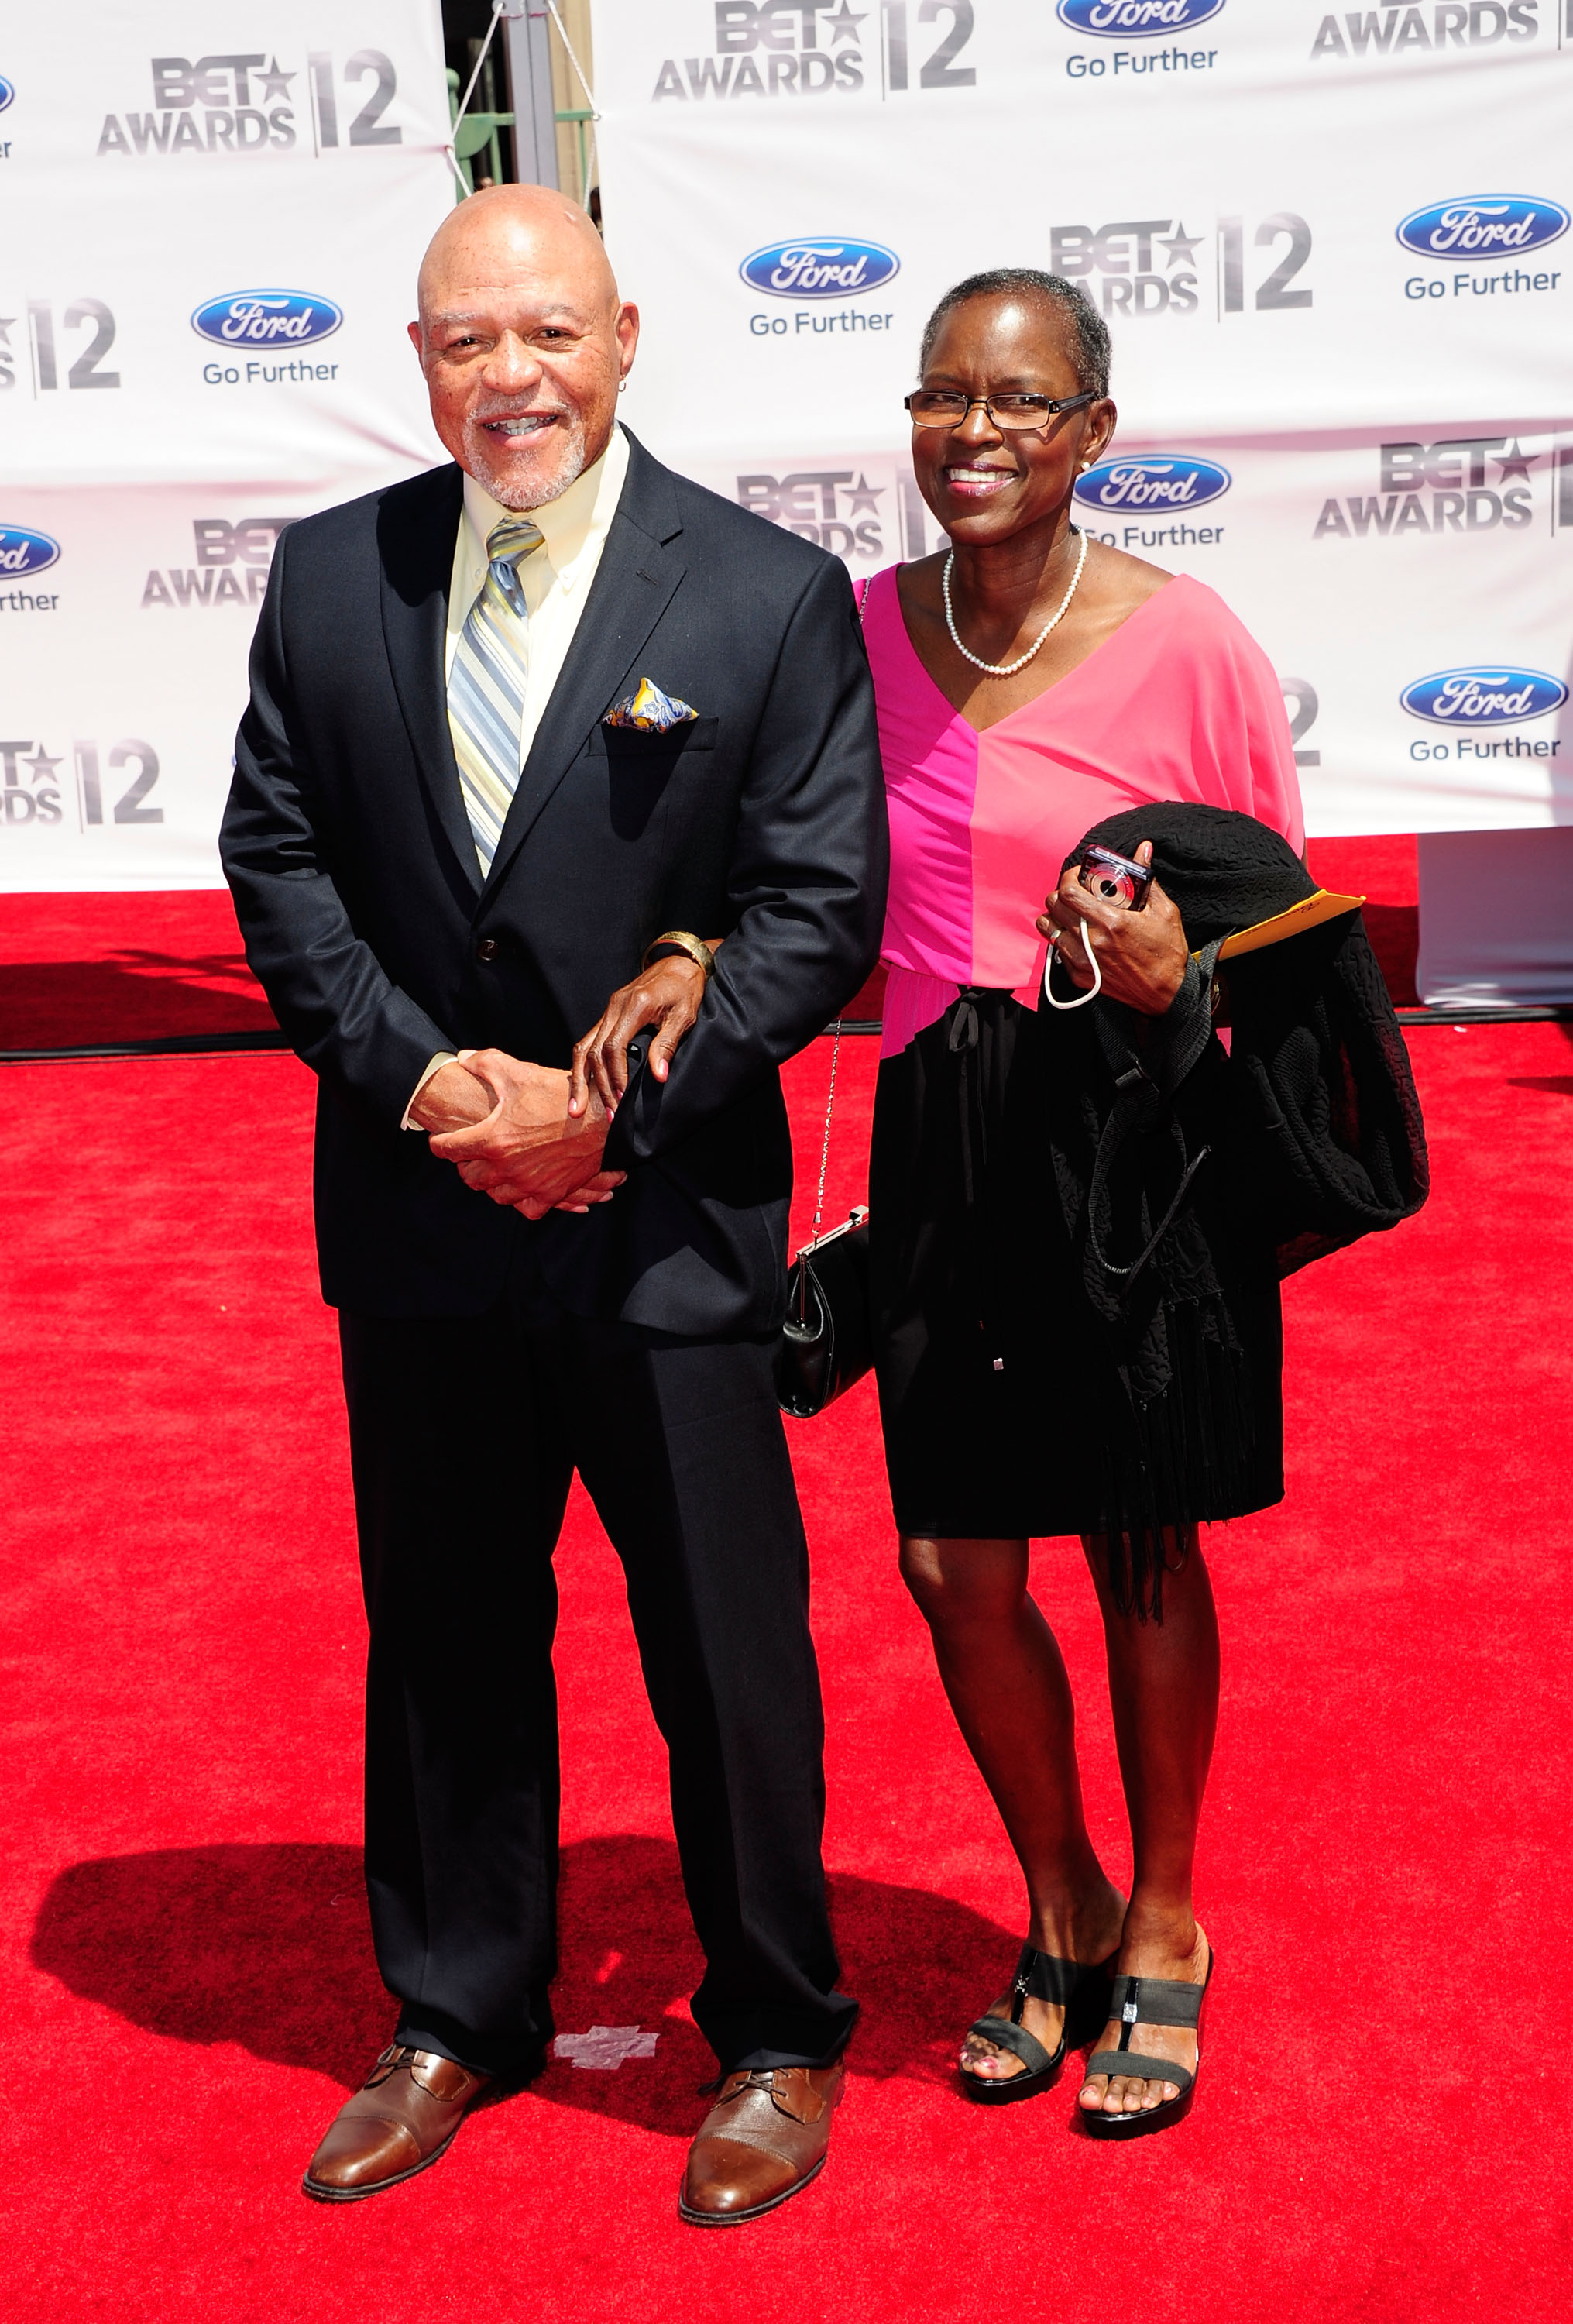 John and Judy Beasley at the 2012 BET Awards on July 1, 2012, in Los Angeles, California. | Source: getty Images